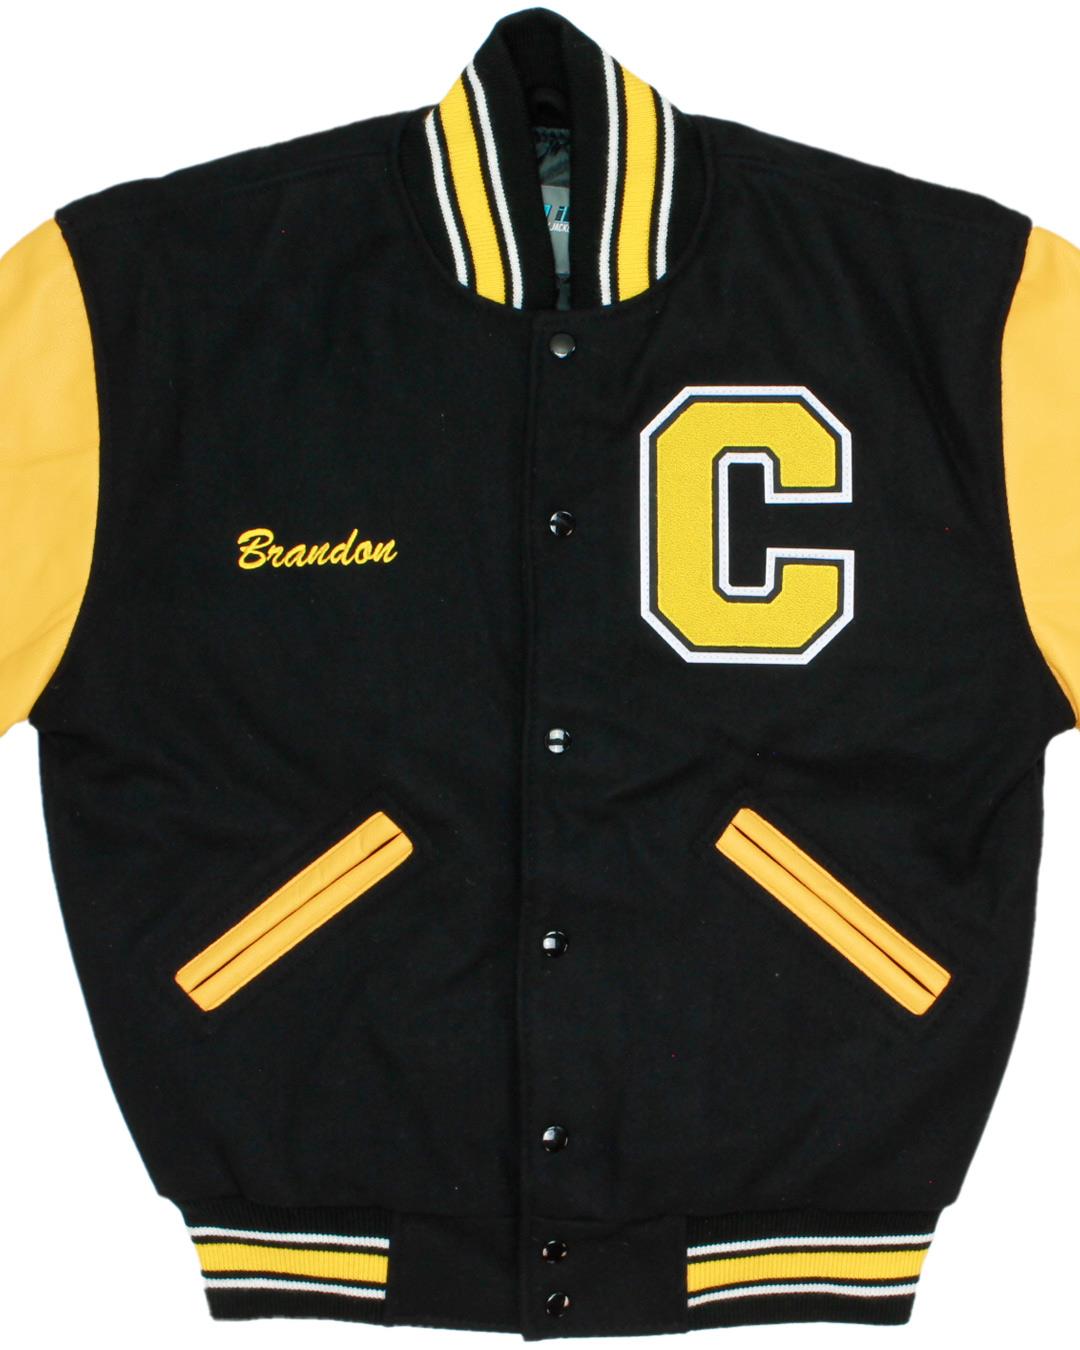 Carroll County High School Panthers Letter Jacket, Carrollton, KY - Front